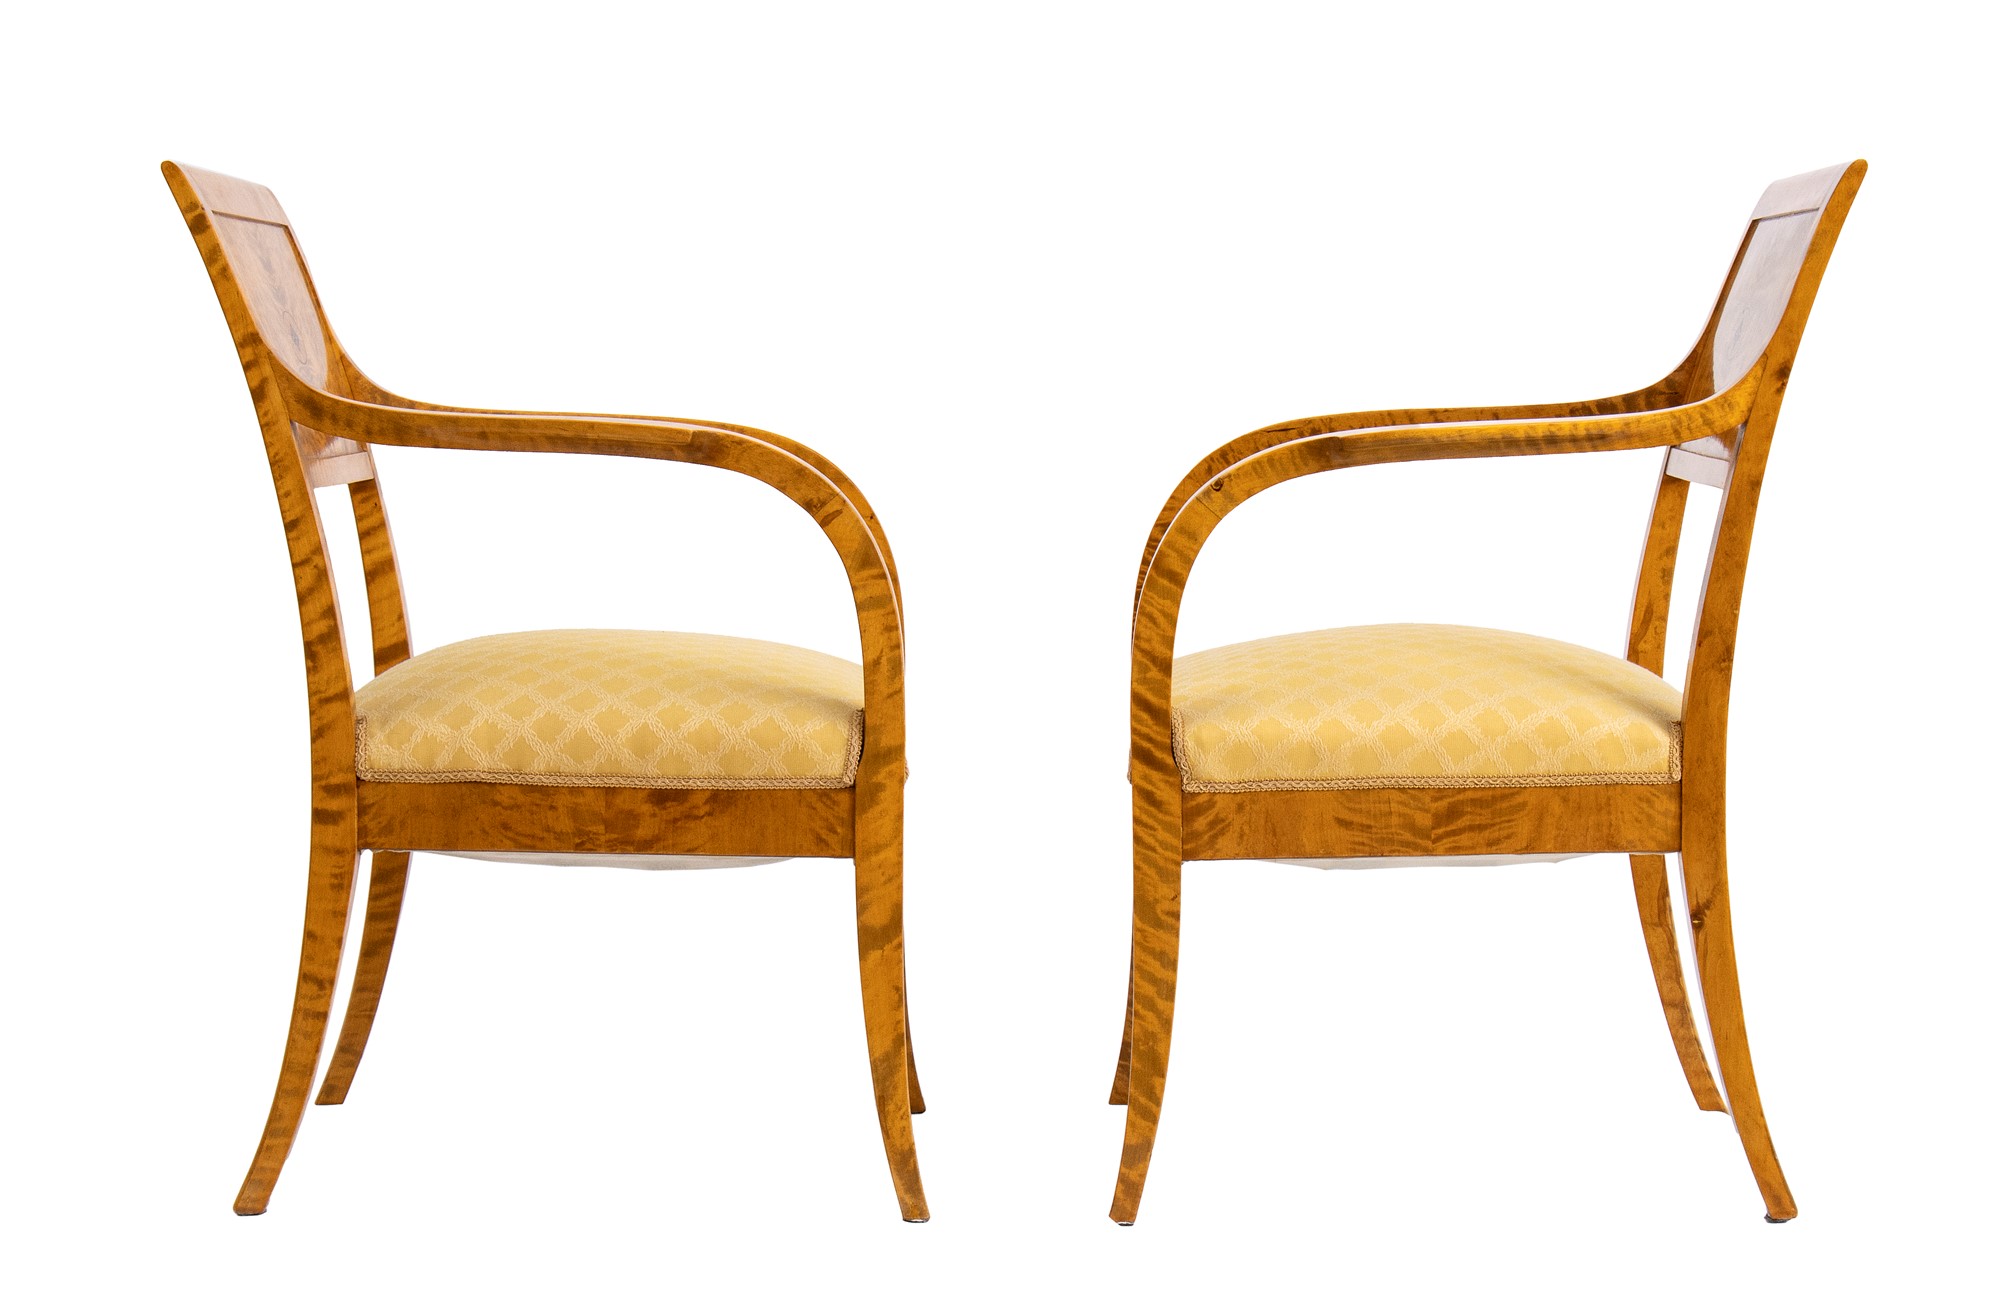 Pair of chairs Biedermeier with back carved in geometric decor with ebonized woods. - Image 7 of 19